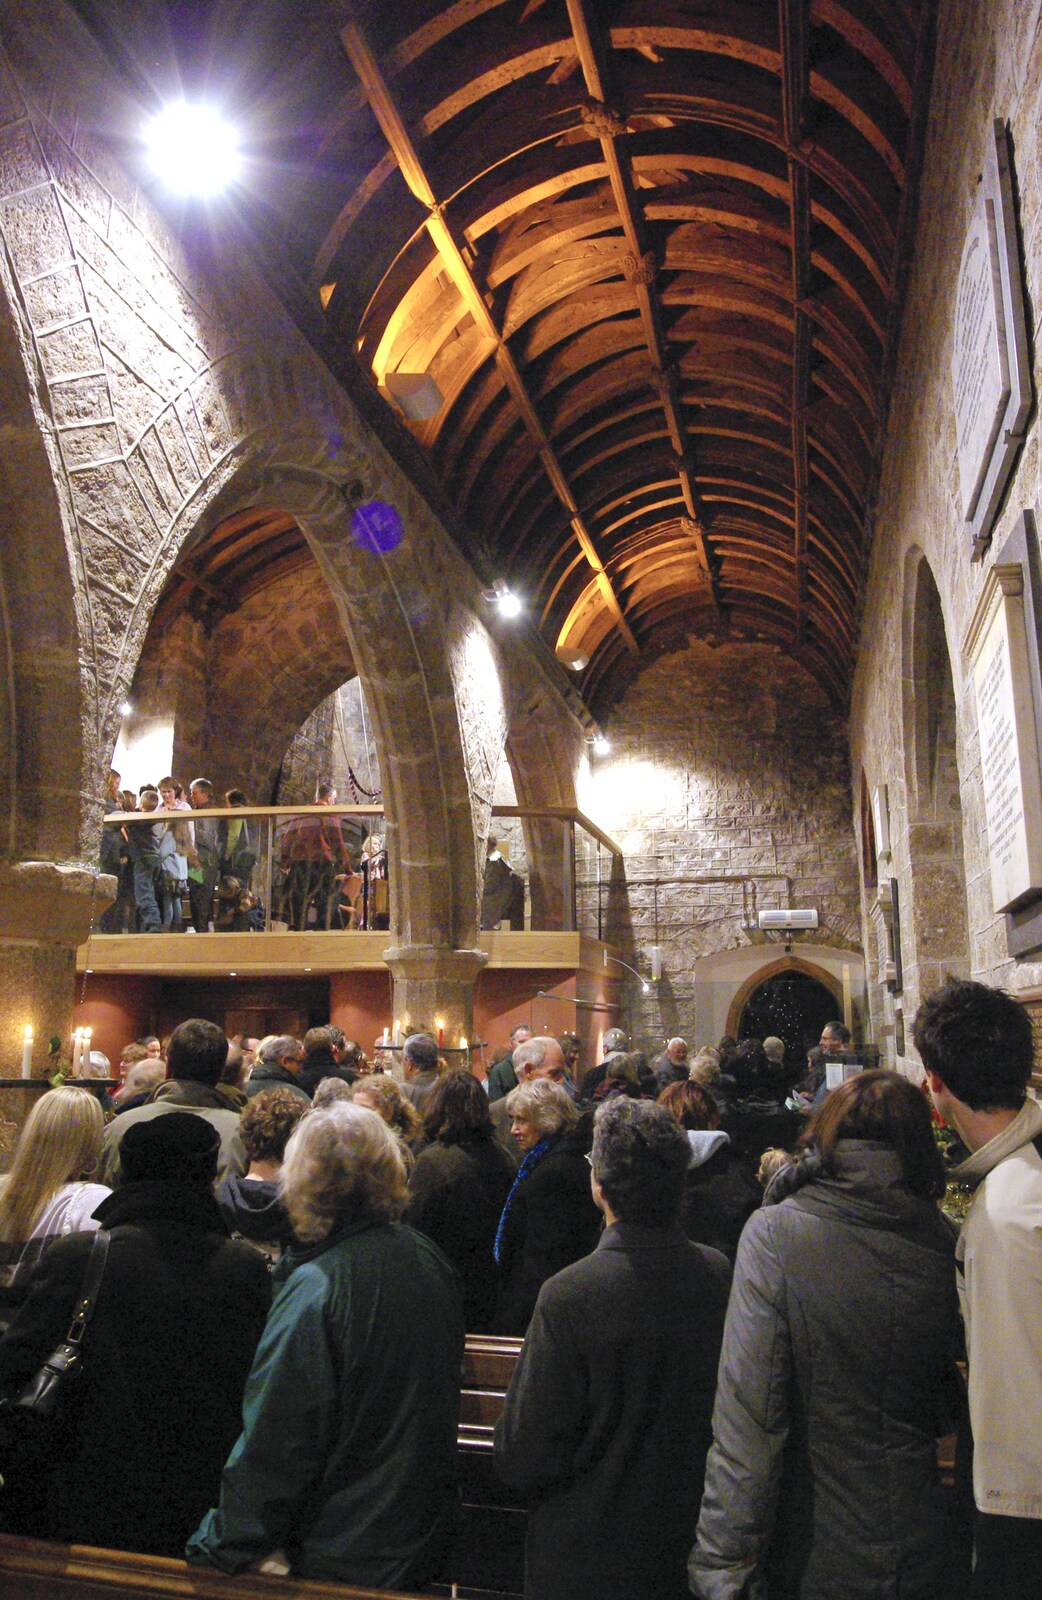 The packed church empties from Christmas at Sis and Matt's, Chagford, Devon - 25th December 2007